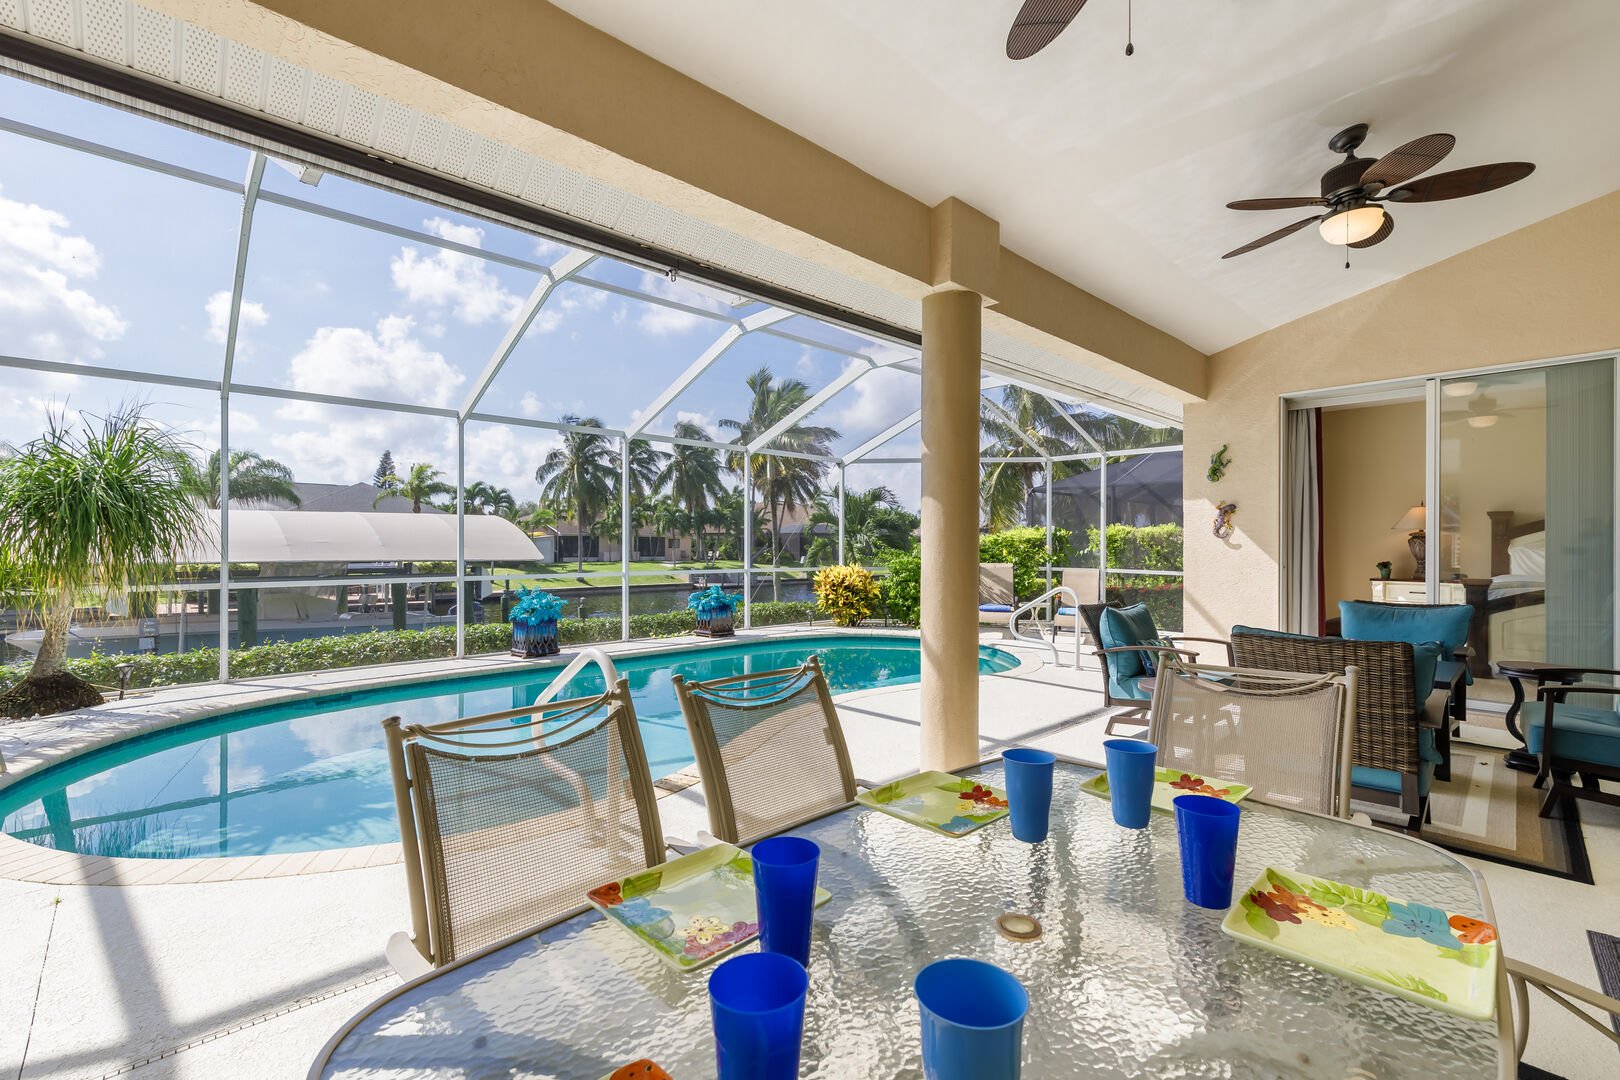 Pool and spa vacation rental in Cape Coral, Florida